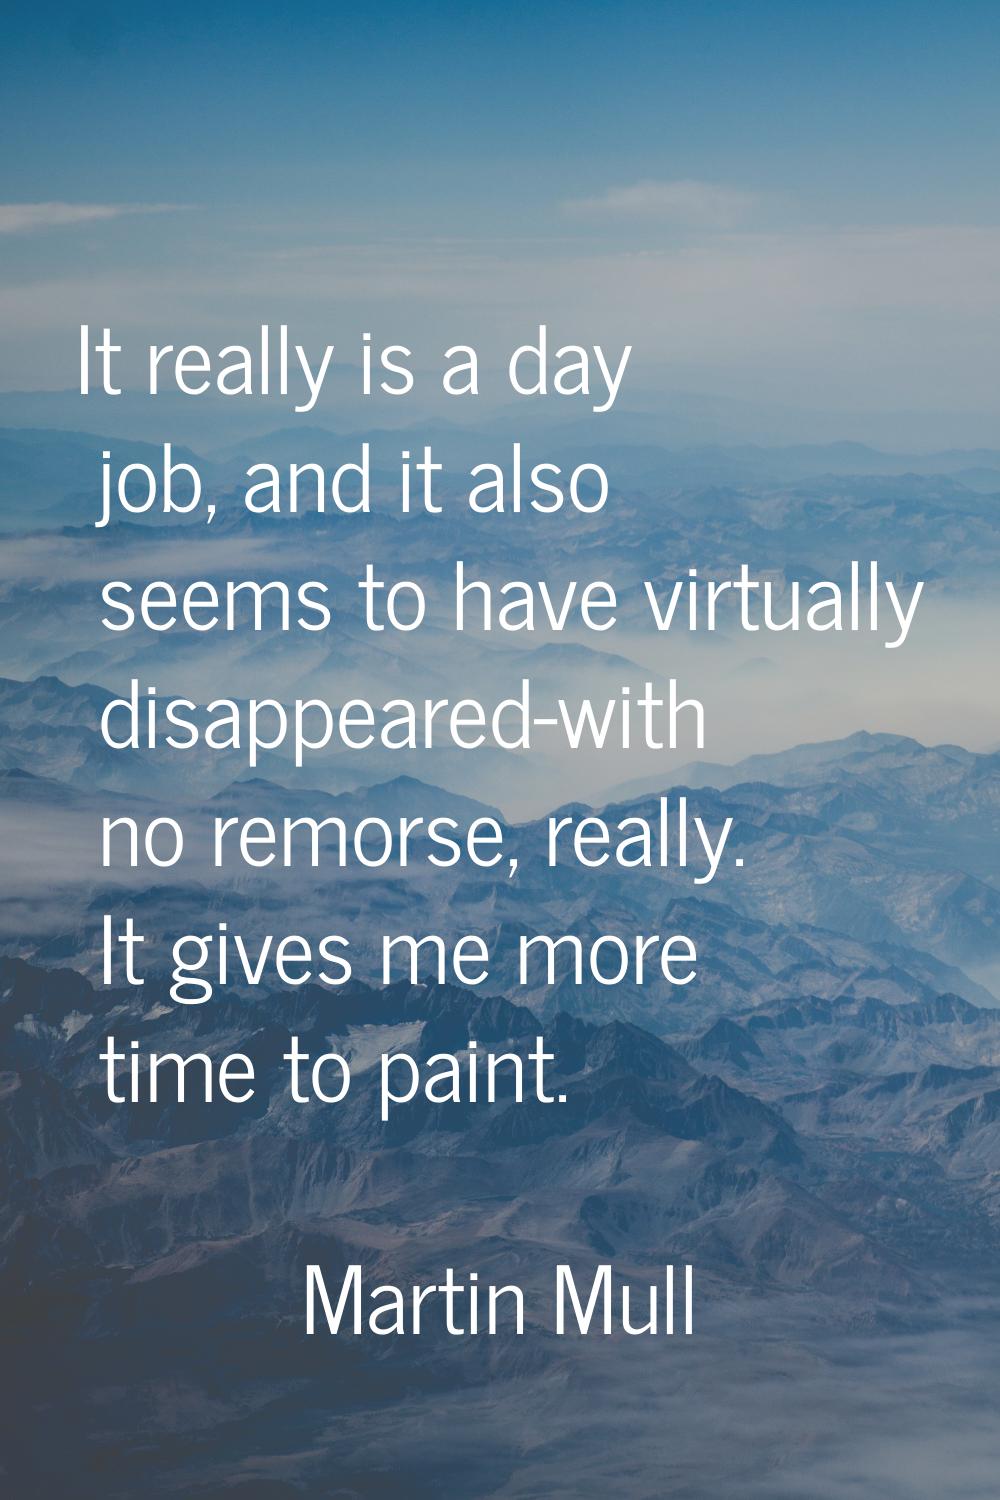 It really is a day job, and it also seems to have virtually disappeared-with no remorse, really. It